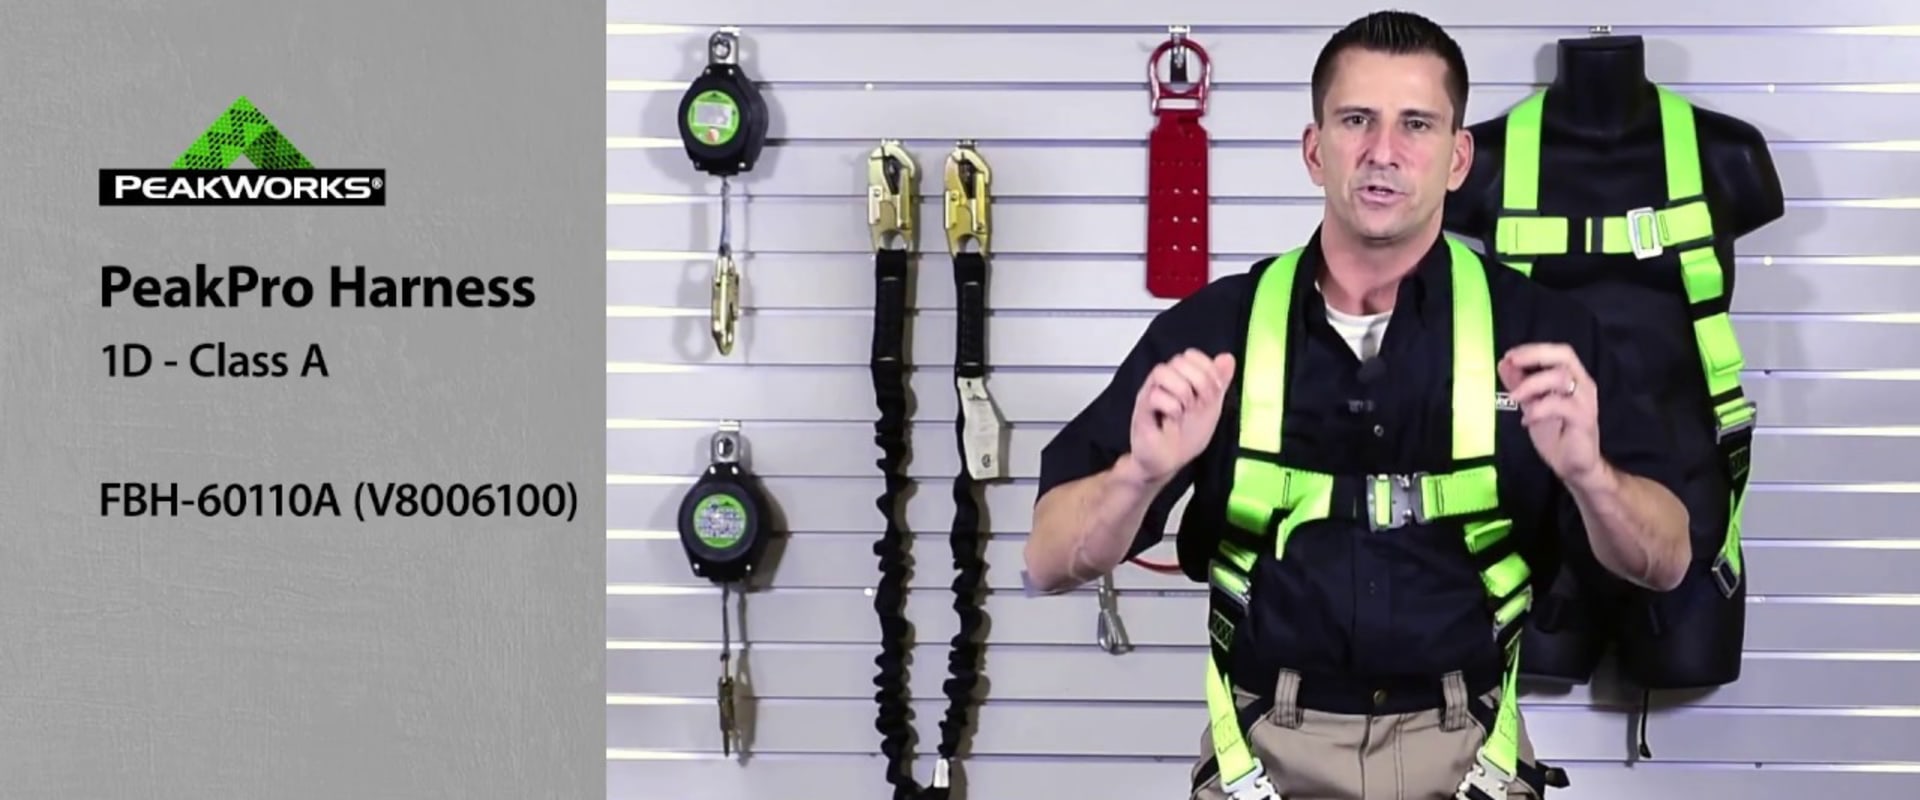 The Proper Use of Safety Harness: Expert Tips for Staying Safe at Heights